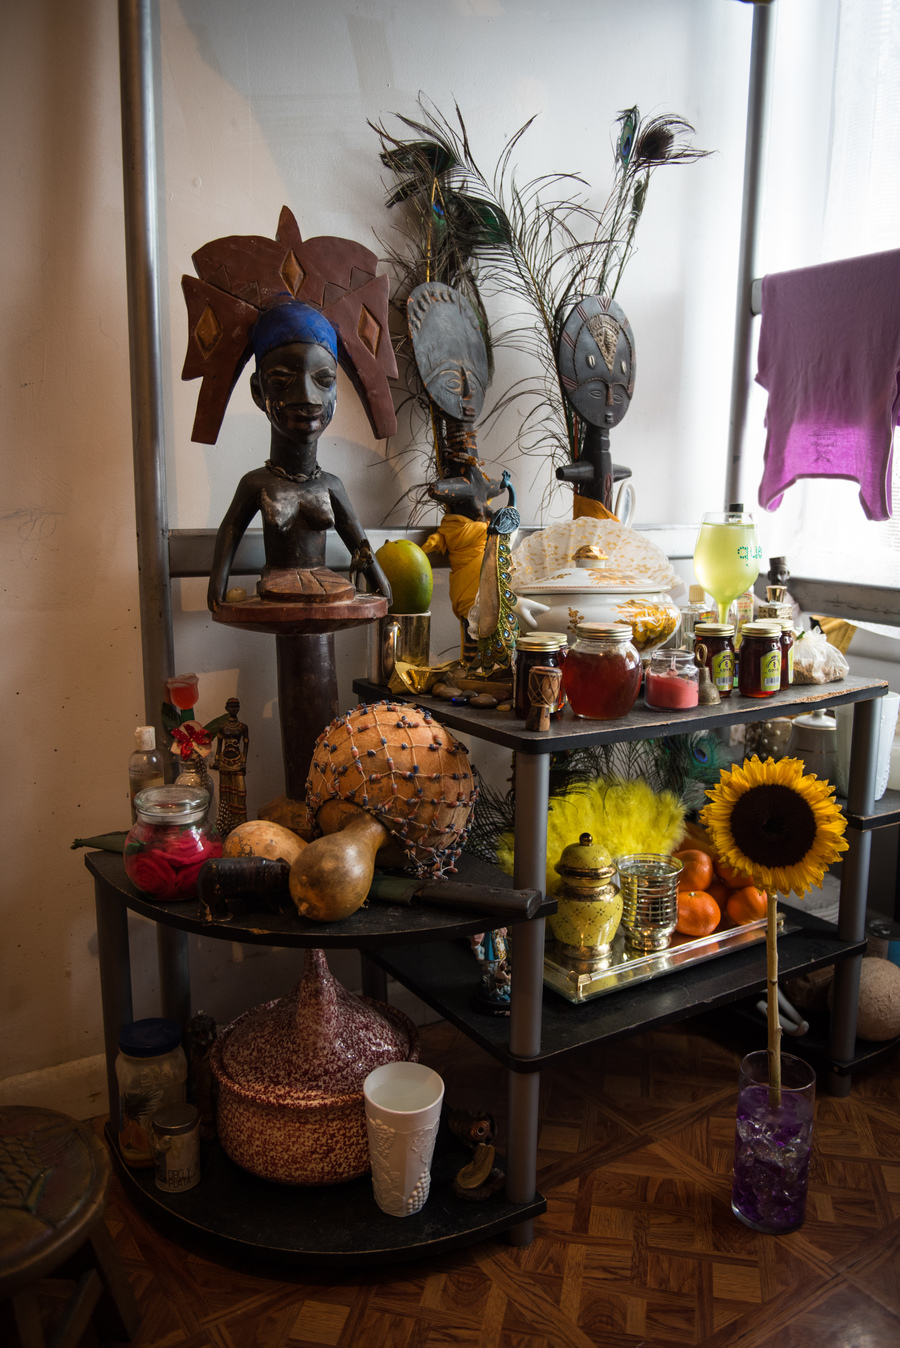 An alter of Santeria is on display at Janeelah's apartment on 758 Kelly Street in the Bronx, New York. 